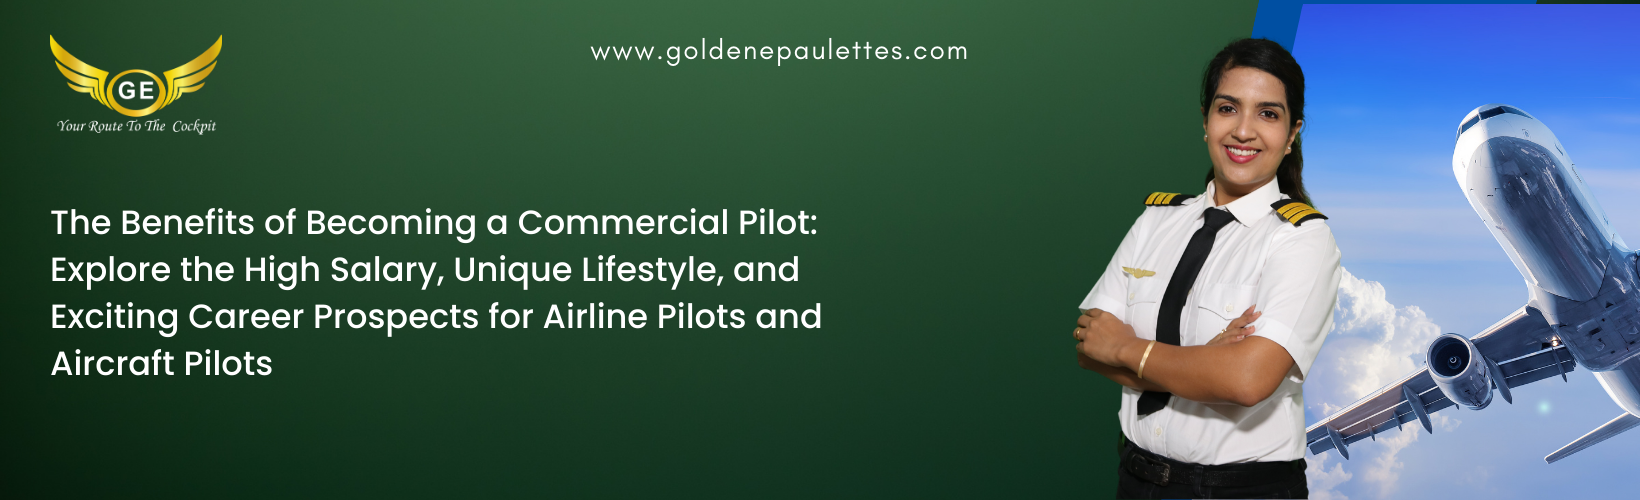 The Cost of Becoming a Commercial Pilot